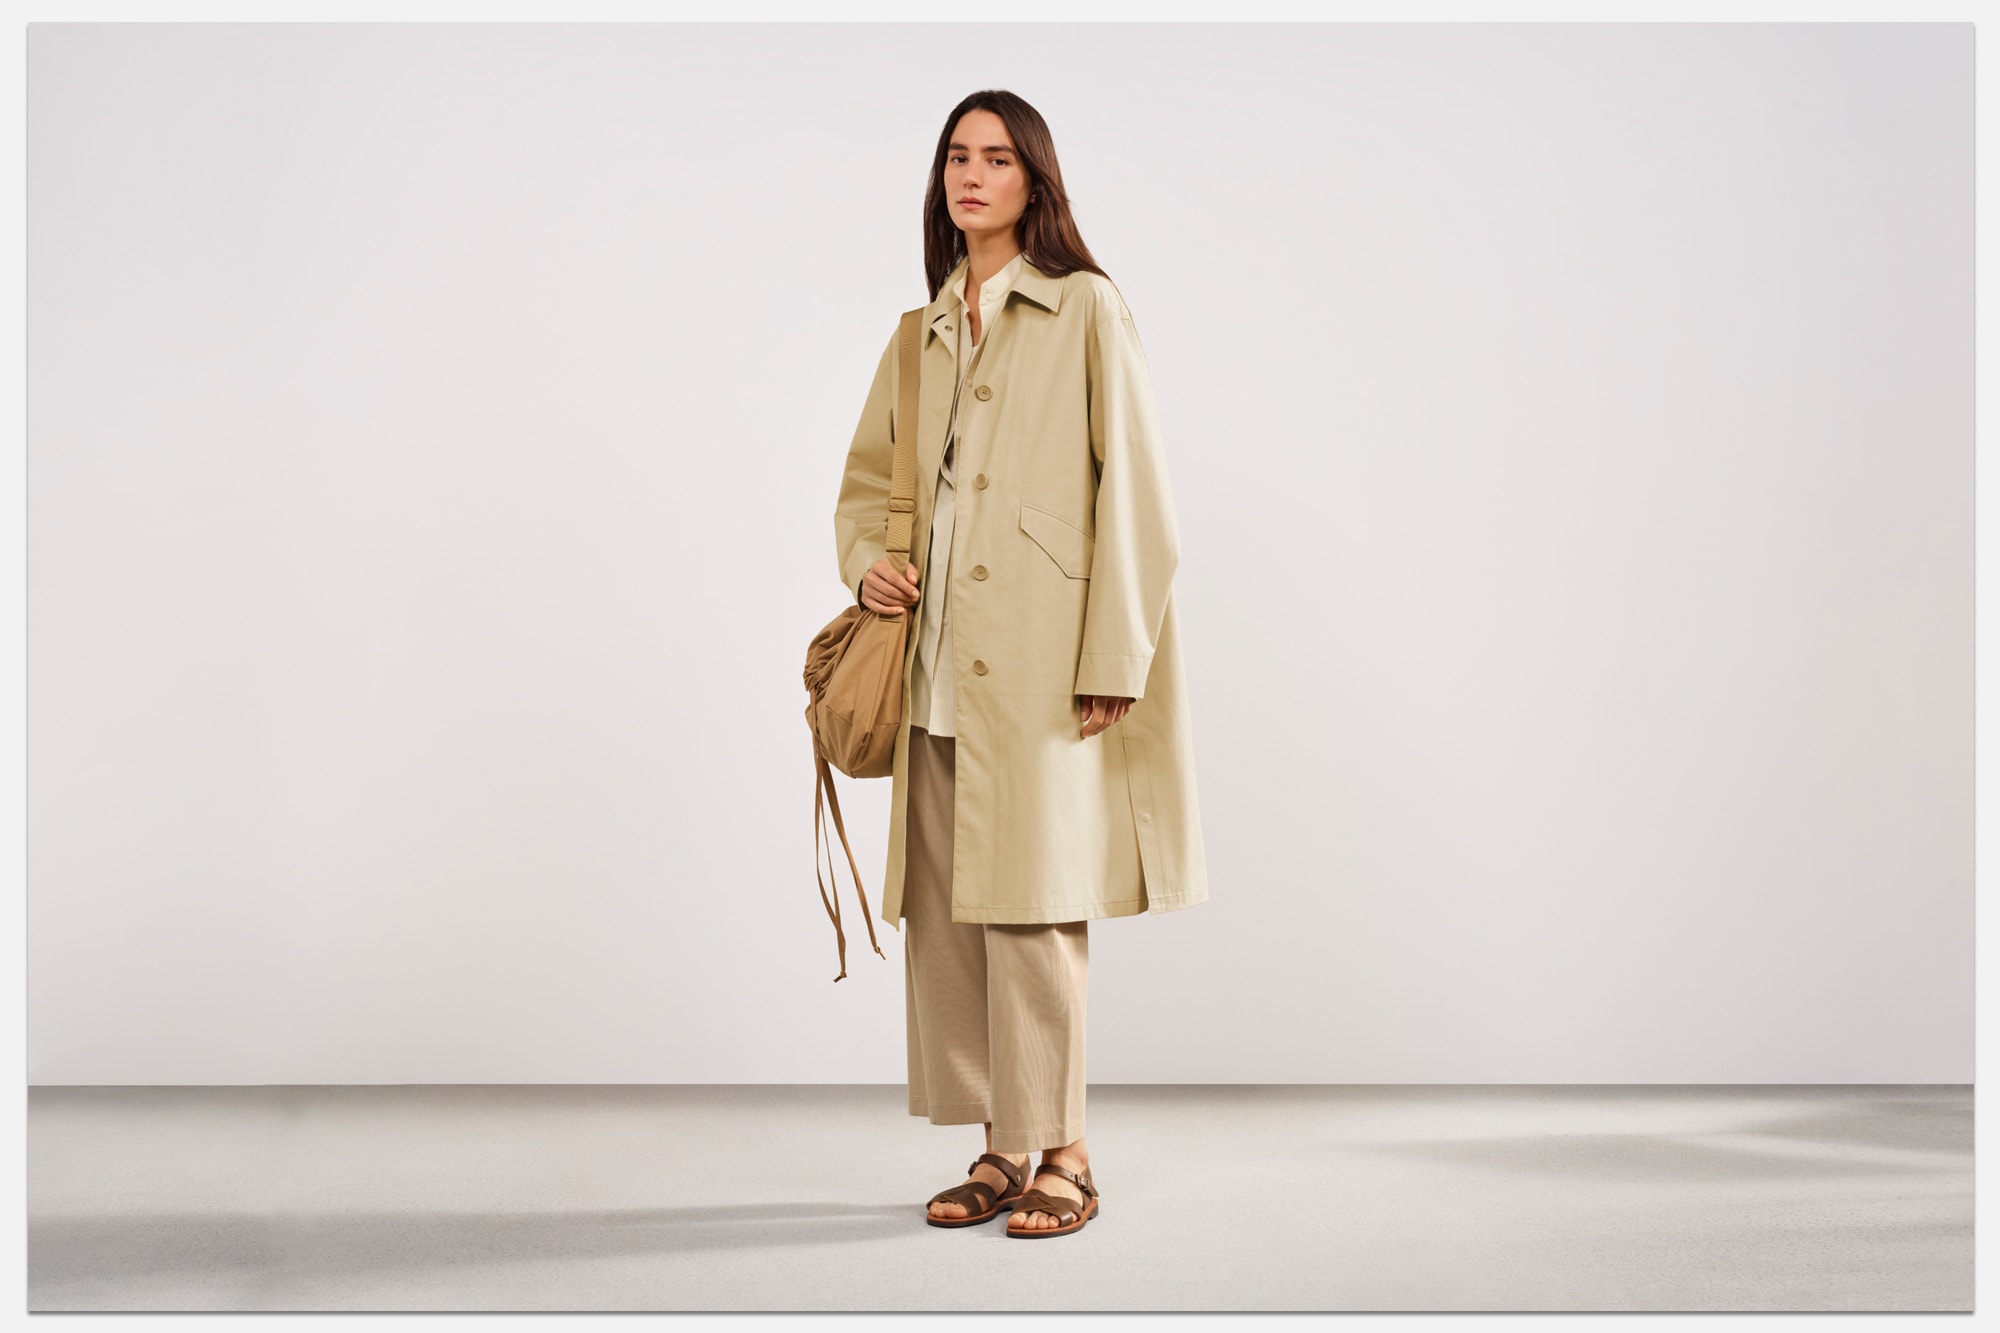 UNIQLO Releases Essentials Lineup Wardrobe Staples Minimalist Neutral T-Shirts Crew Necks Silhouettes Fundamental Cotton Pieces Spring Summer 2022 Collection Shirt Dresses Trench Coat Button-Ups Windbreaker Parisian Style 